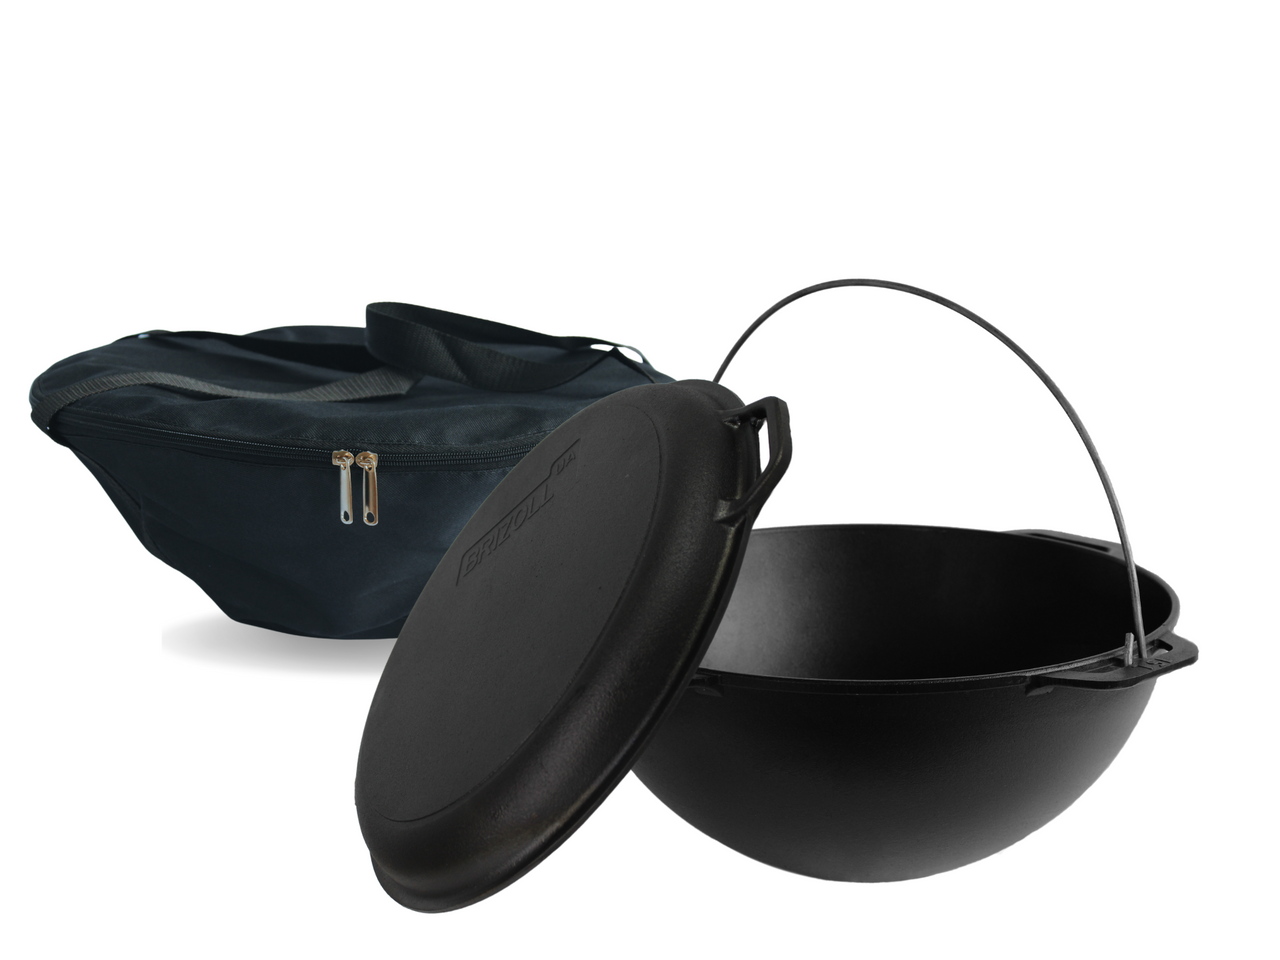 Cast iron asian cauldron 8 L WITH A LID-FRYING PAN, a tripod and a bag